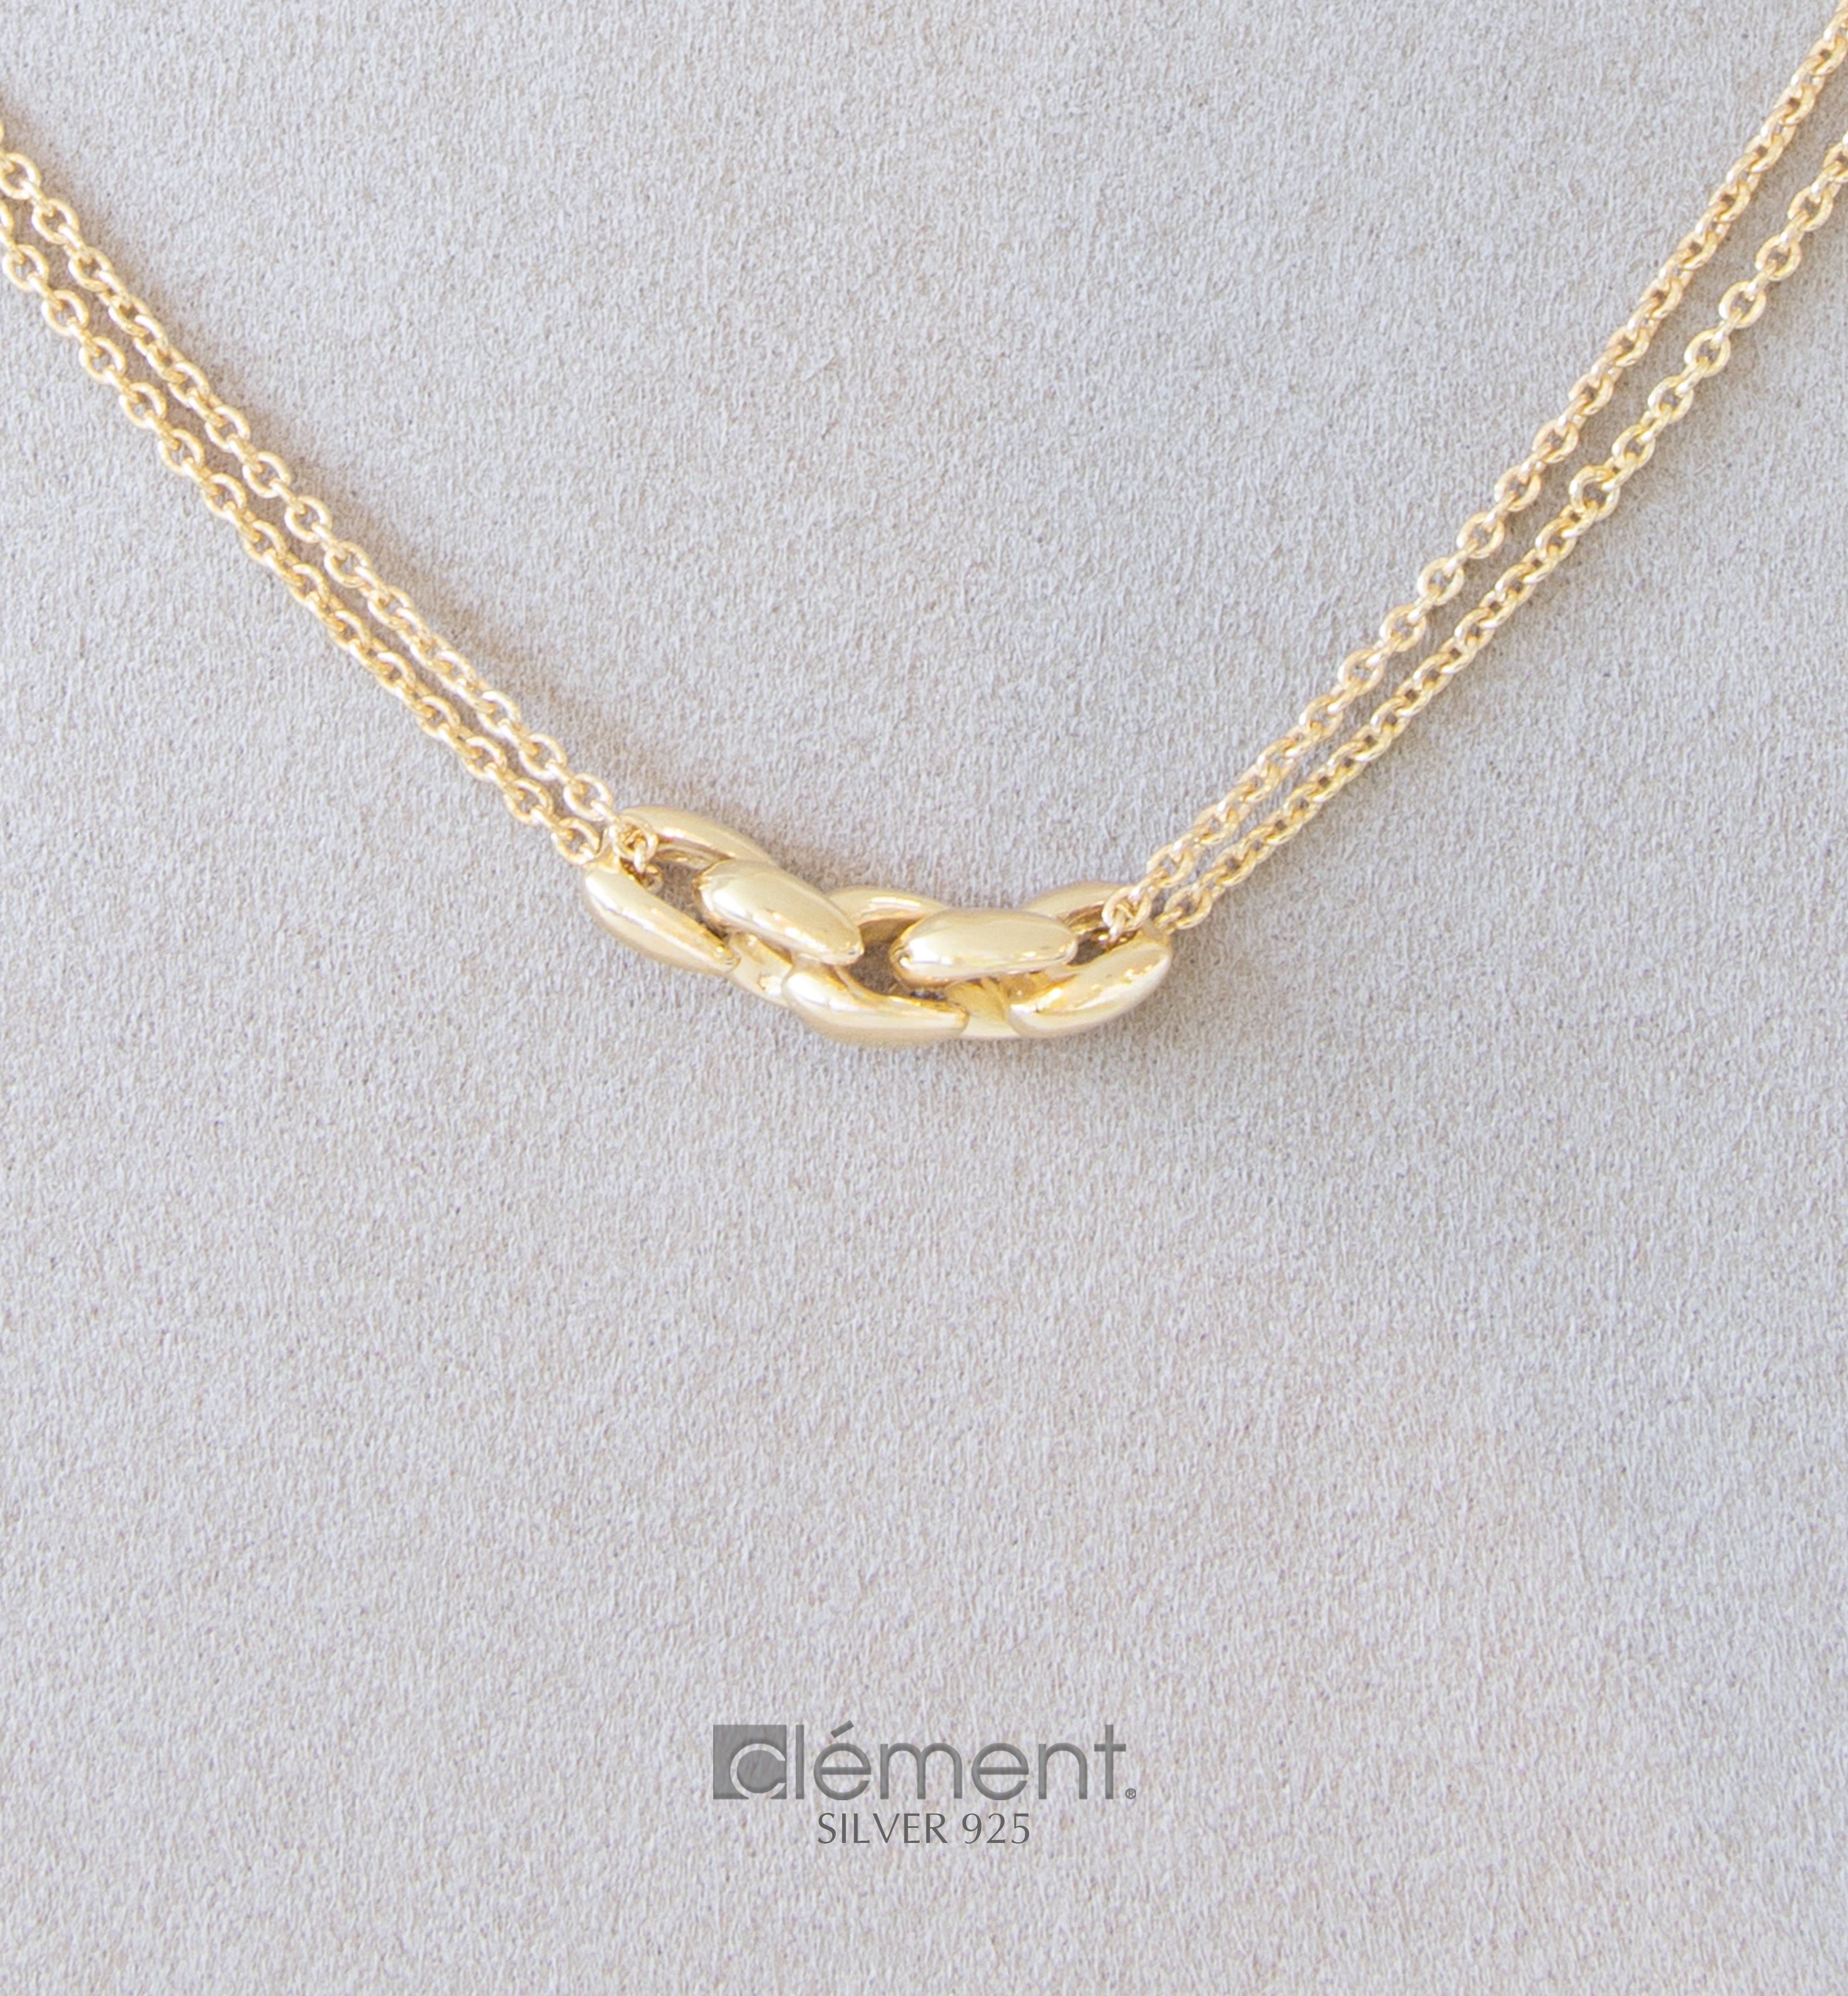 Silver 925 Yellow Gold Plated Design Necklace